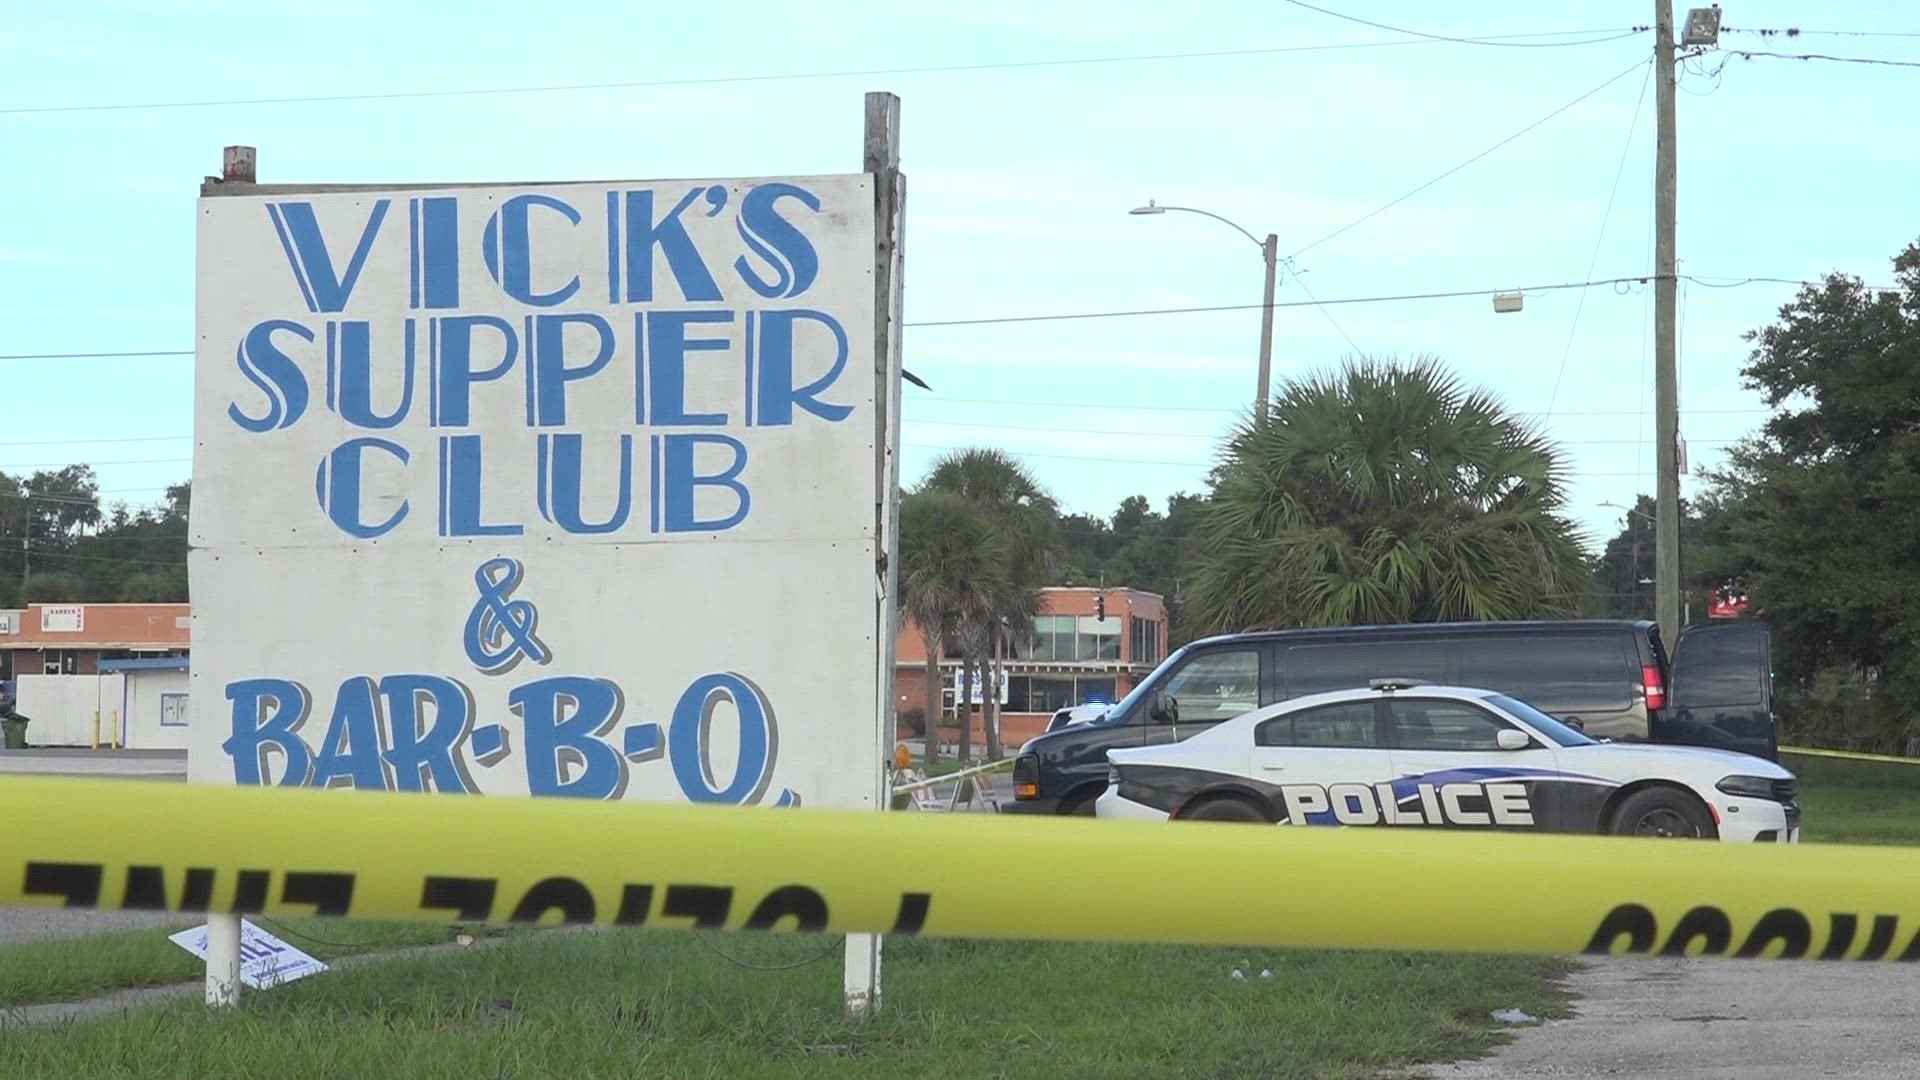 Officials responded to a deadly shooting at Vick's Supper Club in Palatka on Saturday night. Two victims are dead and two are in critical condition.